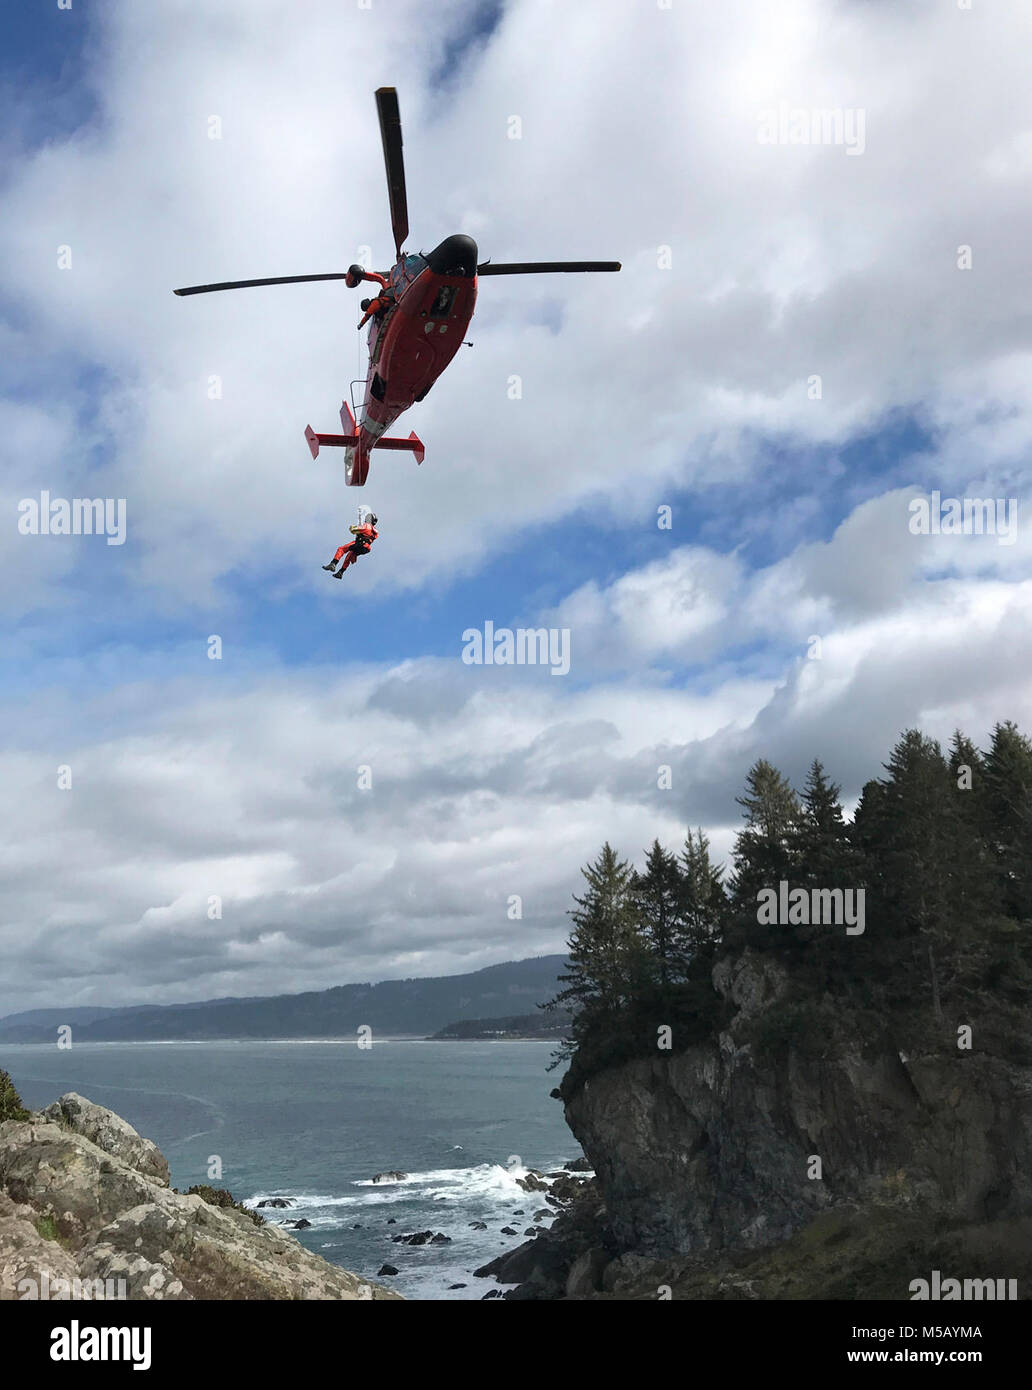 A Coast Guard Sector Humboldt Bay MH-65 Dolphin helicopter crew conducts cliff-rescue training at Patrick's Point State Park, California, Feb. 14, 2018. The helicopter crews assigned to Sector Humboldt Bay cover Humboldt, Mendocino and Del Norte counties. (U.S. Coast Guard Stock Photo